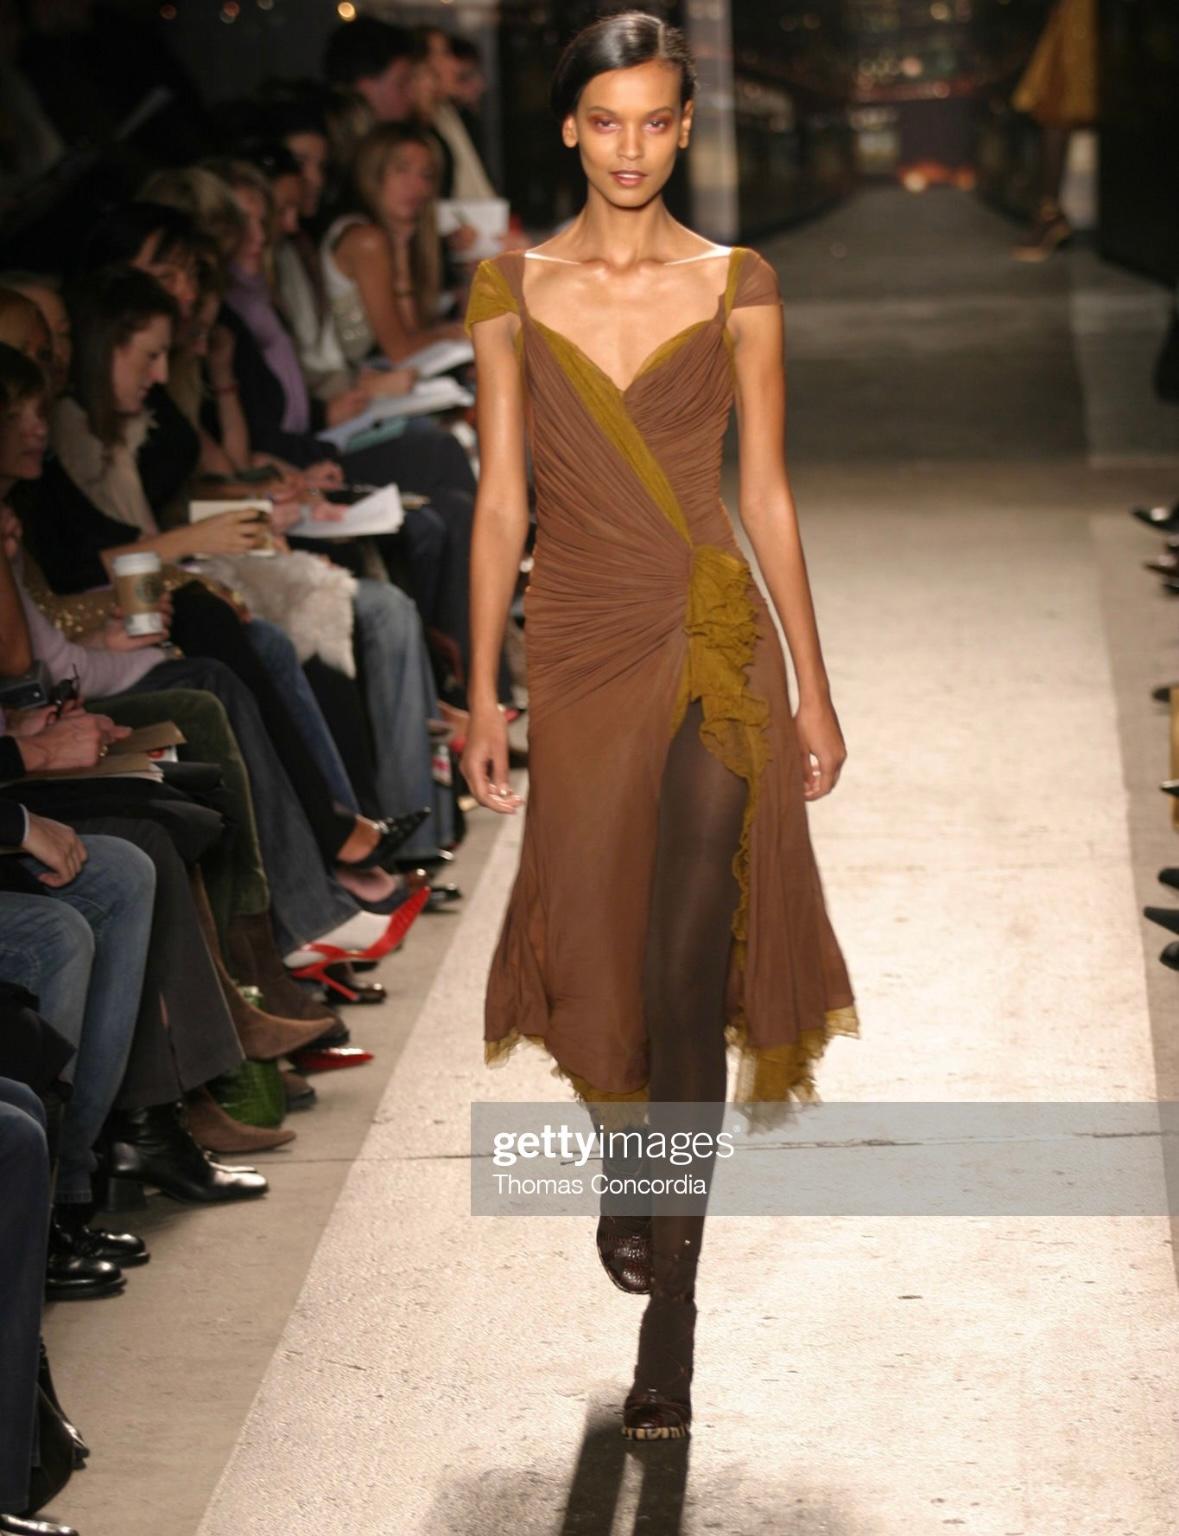 Presenting a brown ruched Donna Karan dress. From the Fall/Winter 2004 collection, a version of this dress debuted on the season’s runway as look 37 modeled by Liya Kebede. This chocolate brown dress features a flared skirt, ruching throughout, and